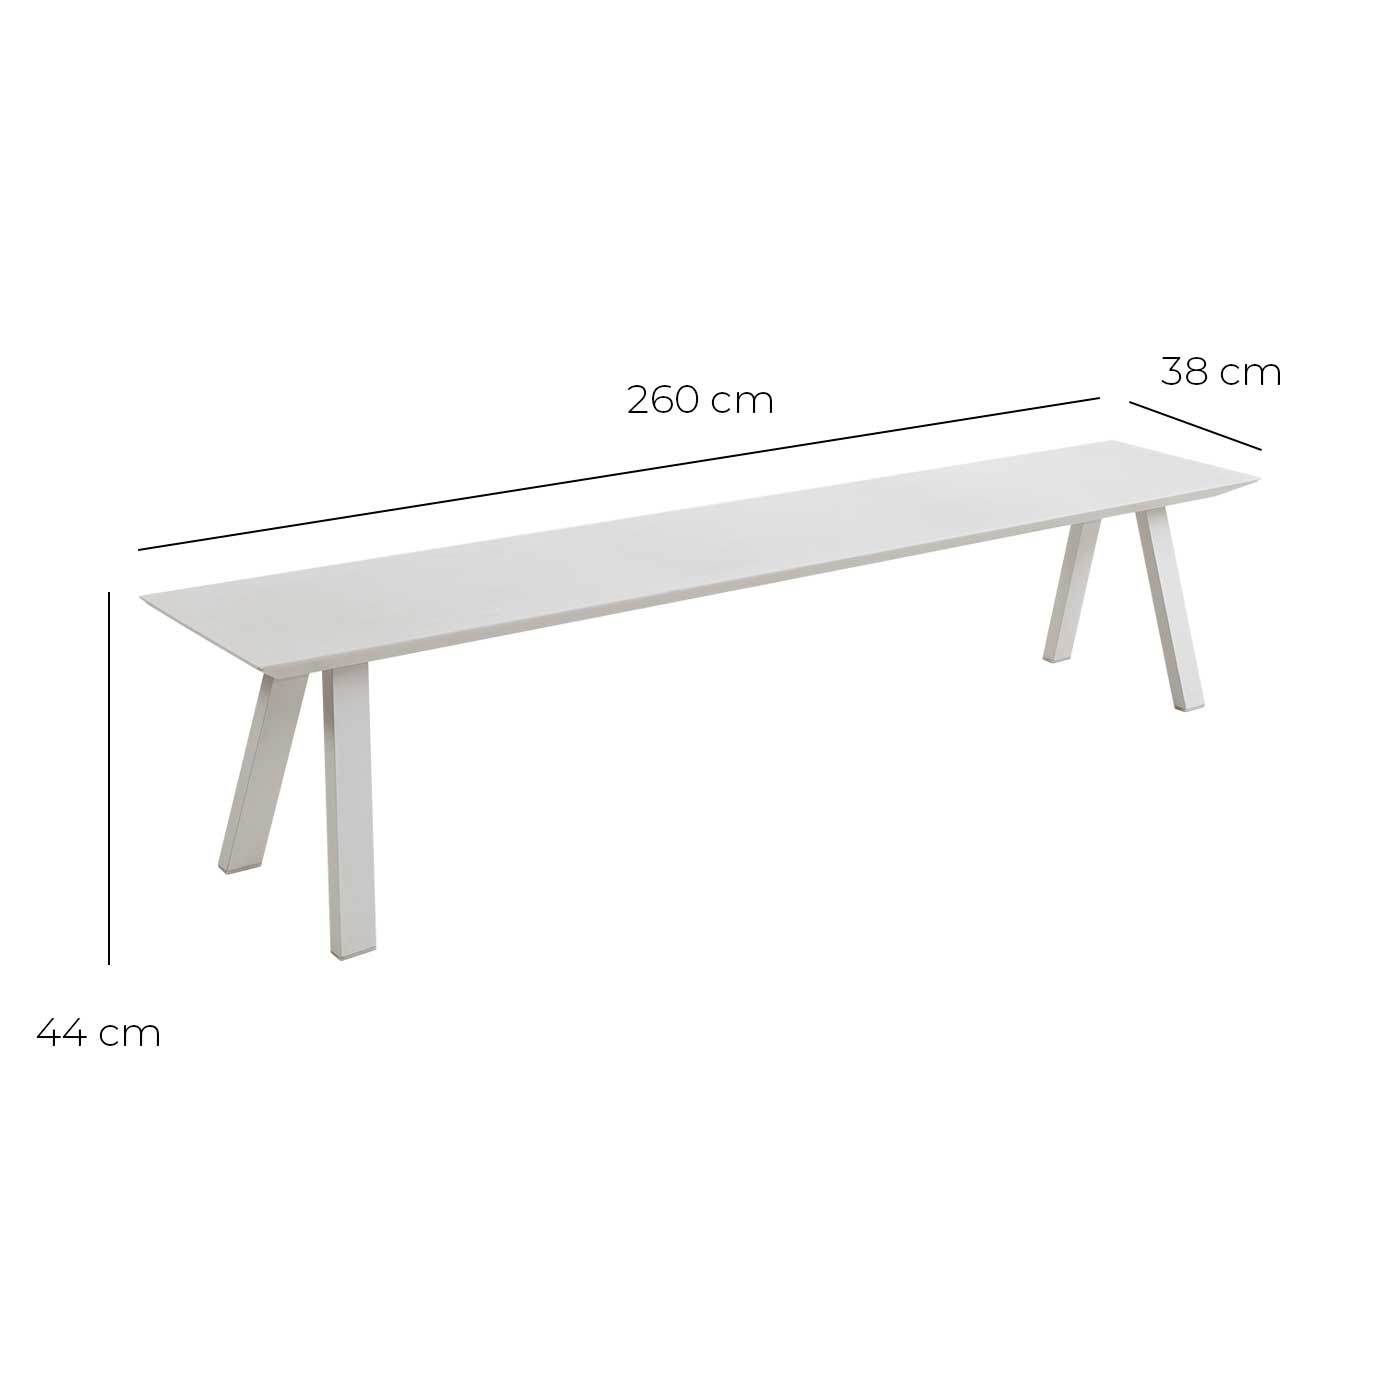 Luxor Bench 2.2m for Sale at Mobelli